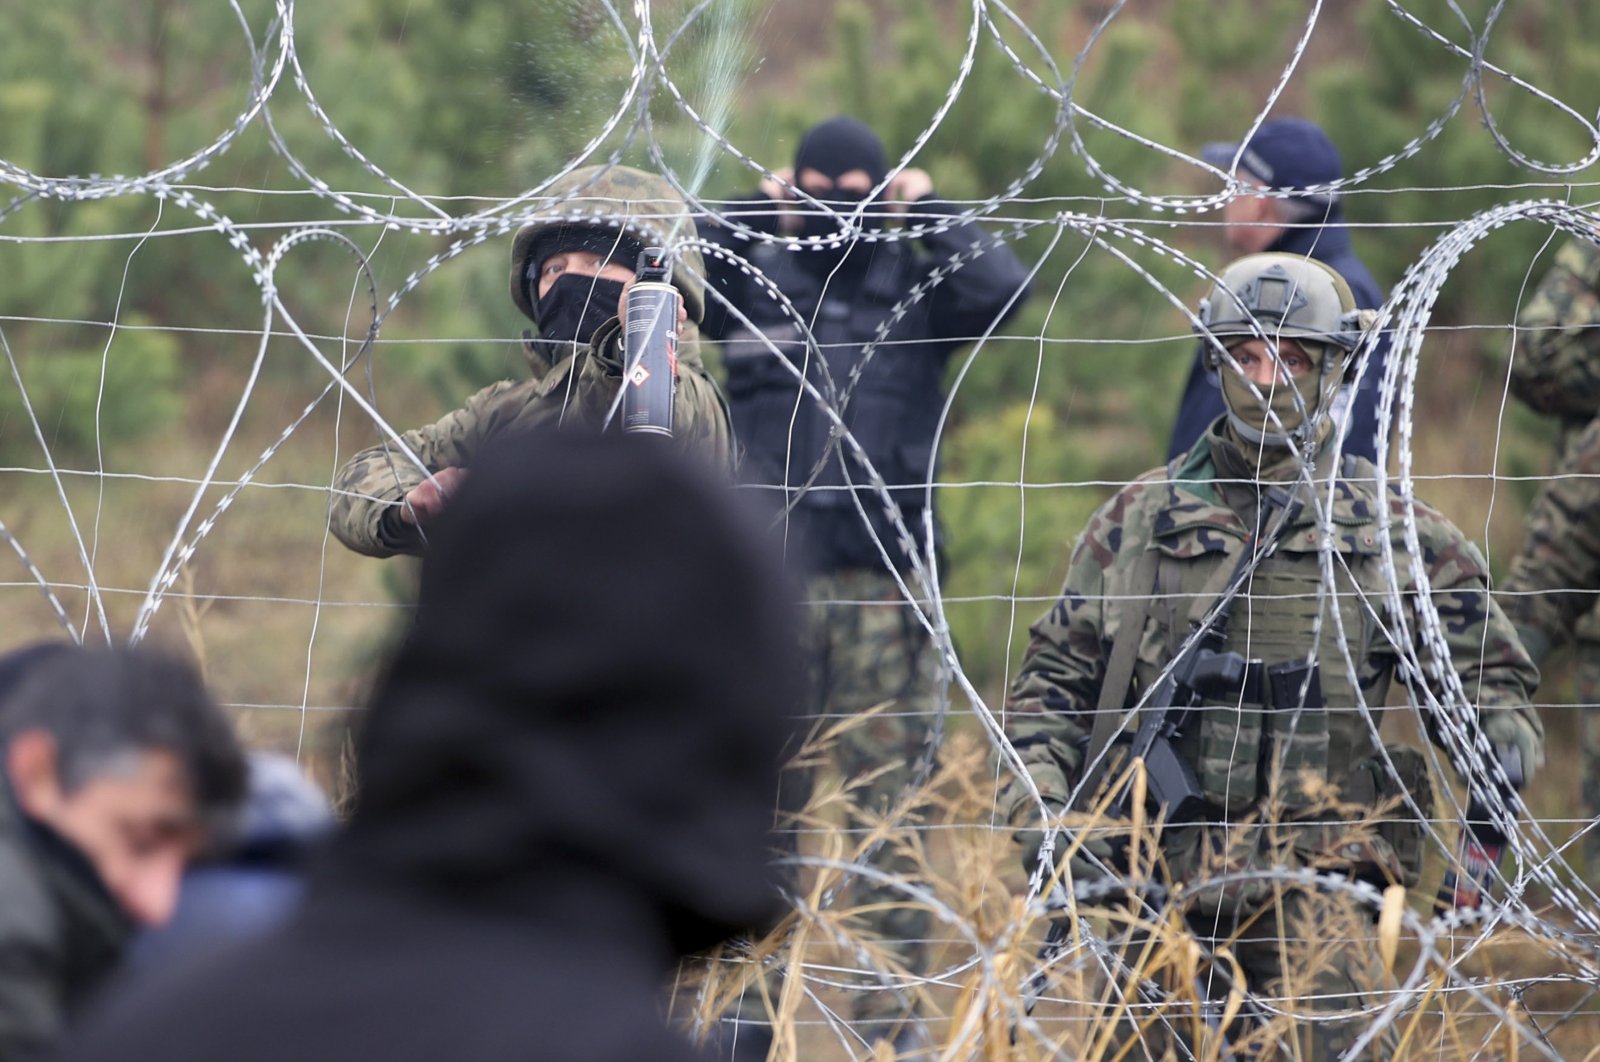 Polish border guards stand near the barbed wire as migrants from the Middle East and elsewhere gather at the Belarus-Poland border near Grodno, Belarus, Monday, Nov. 8, 2021. (AP Photo)